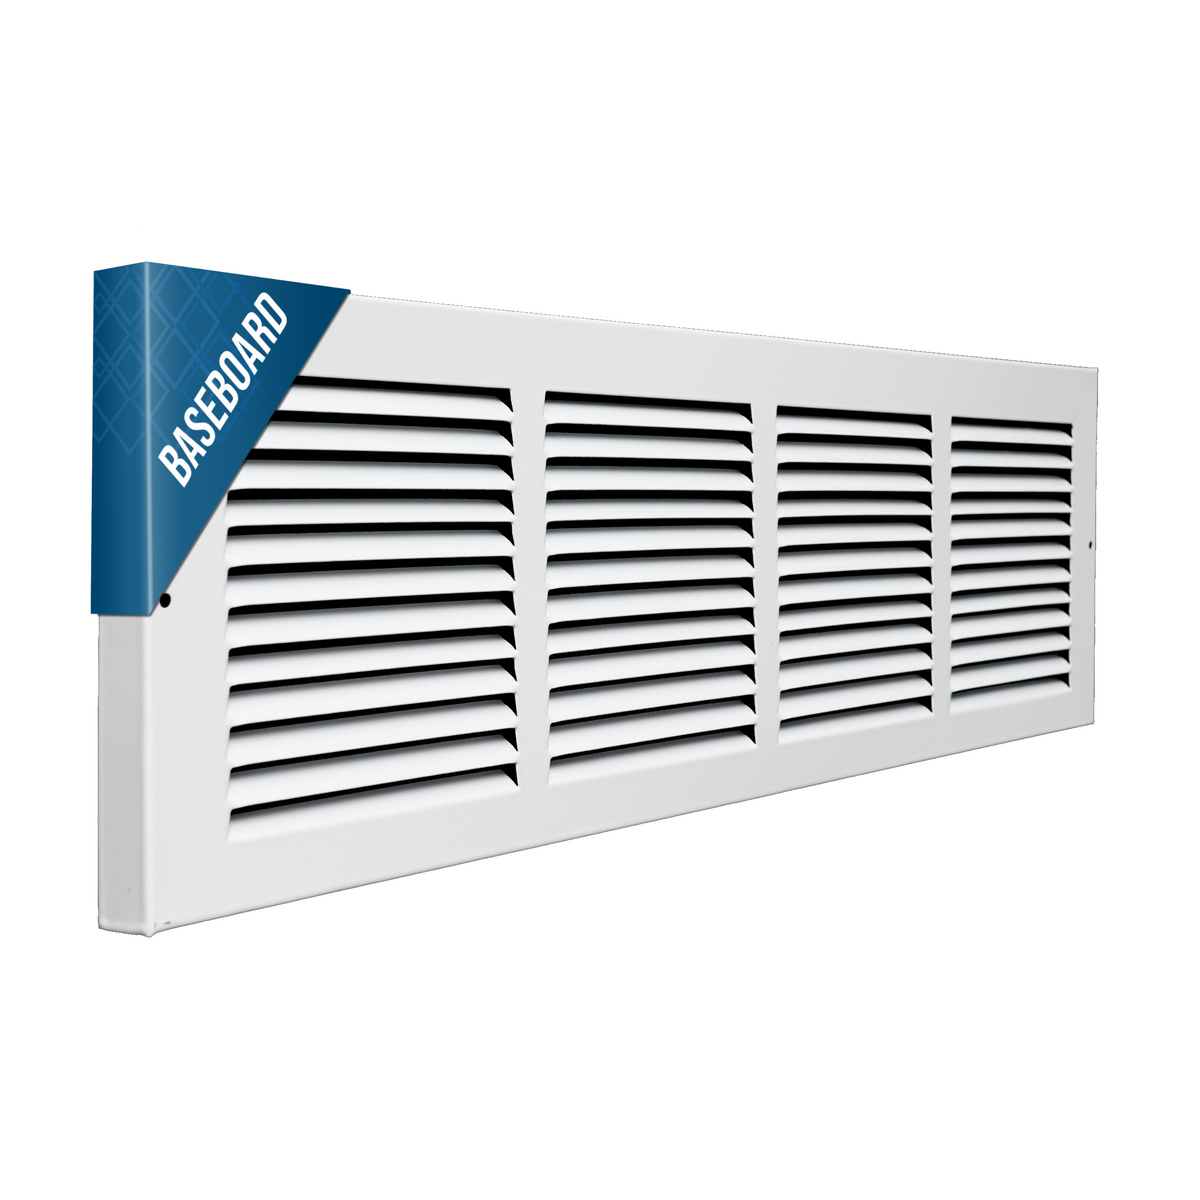 24"W x 6"H [Duct Opening] Baseboard Return Air Grille | 7/8" Margin Turnback to Fit Baseboard | White | Outer Dimensions: 25.75"W X 7.75"H